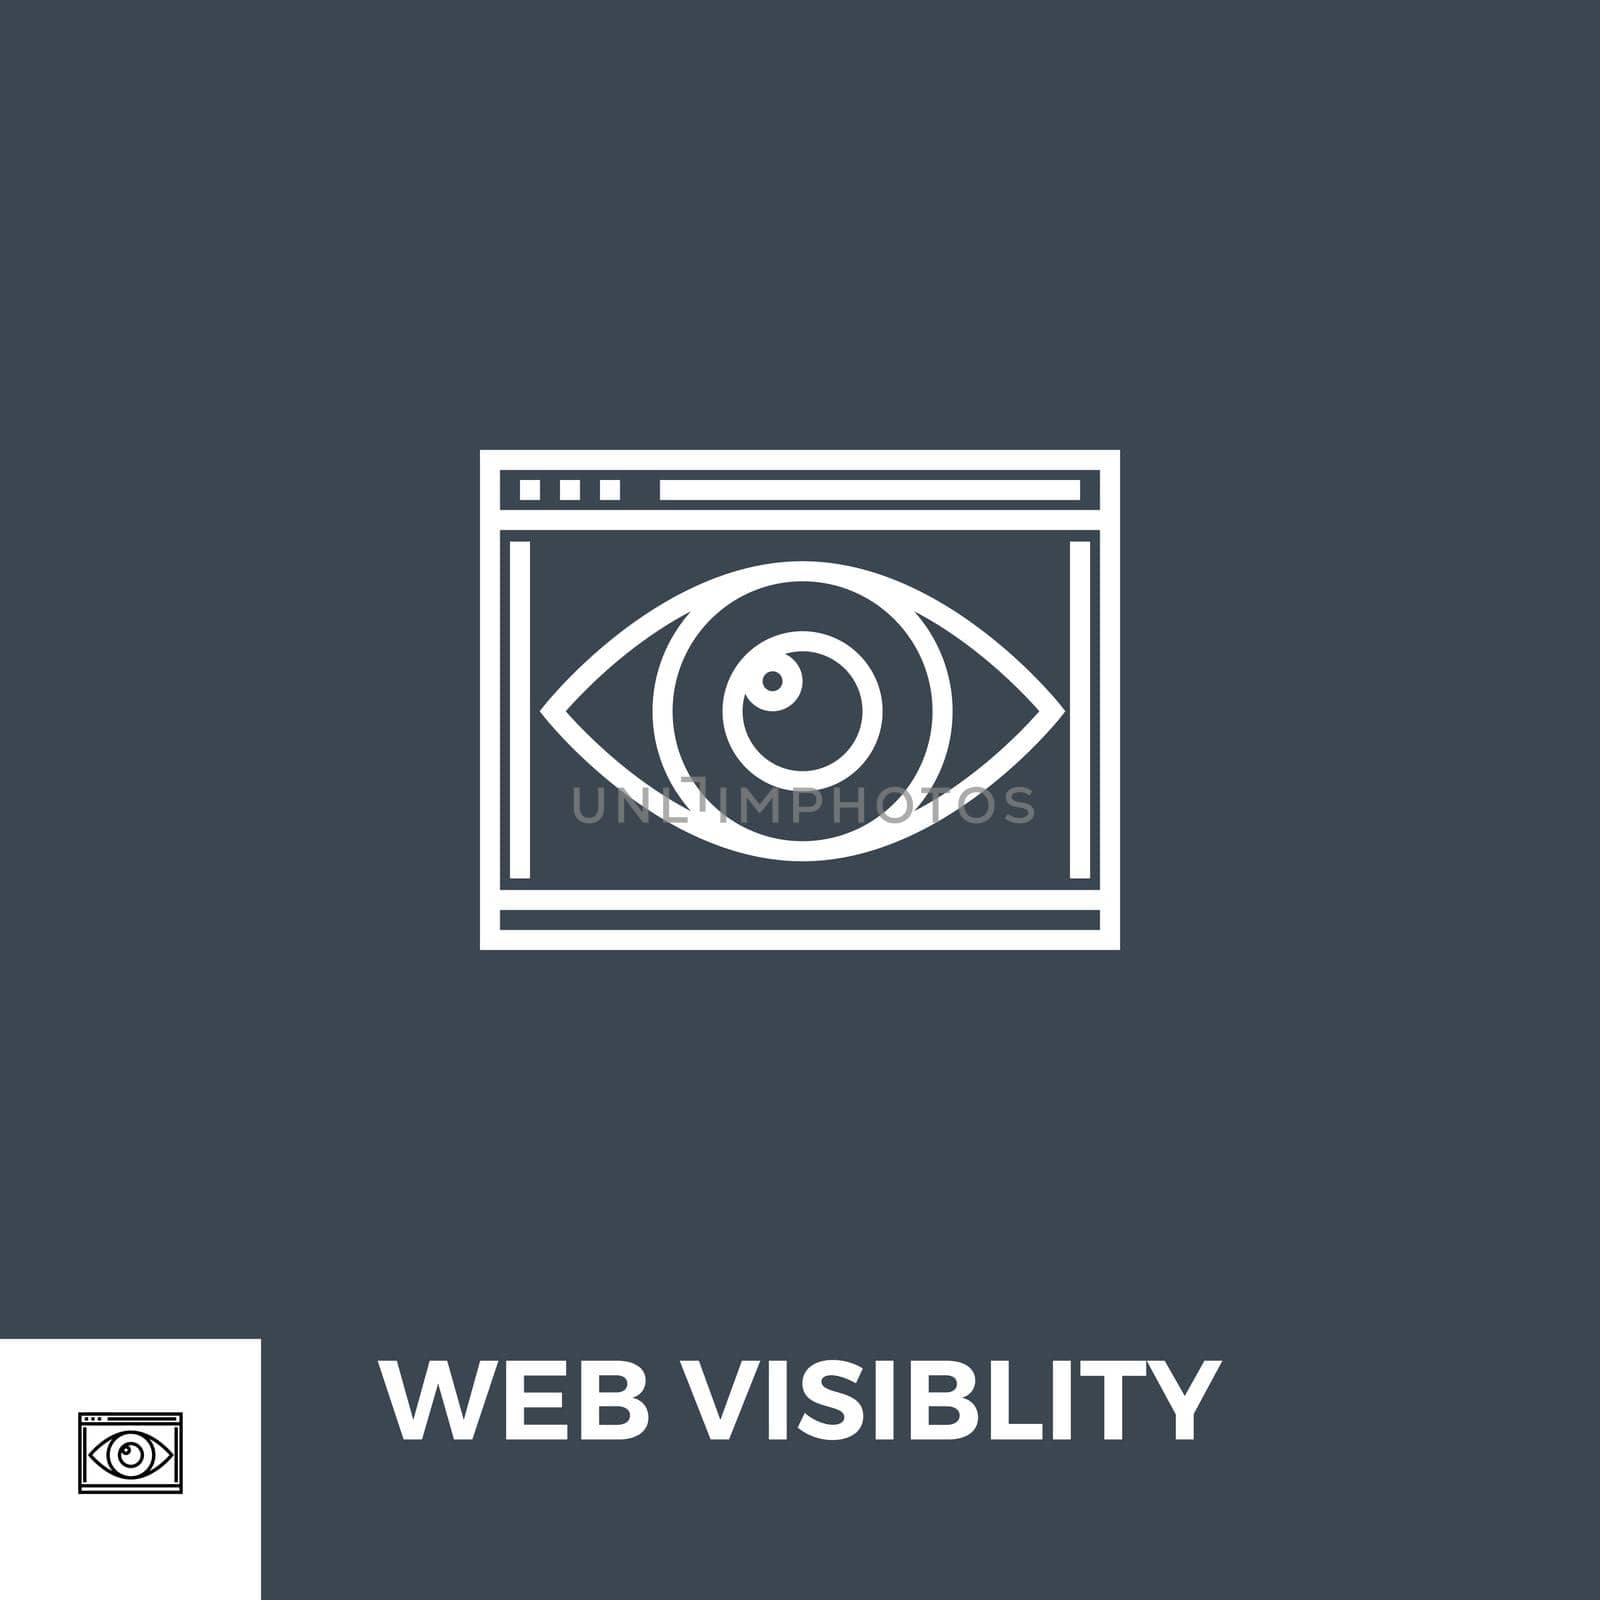 Web Visiblity Related Vector Thin Line Icon. Isolated on Black Background. Vector Illustration.